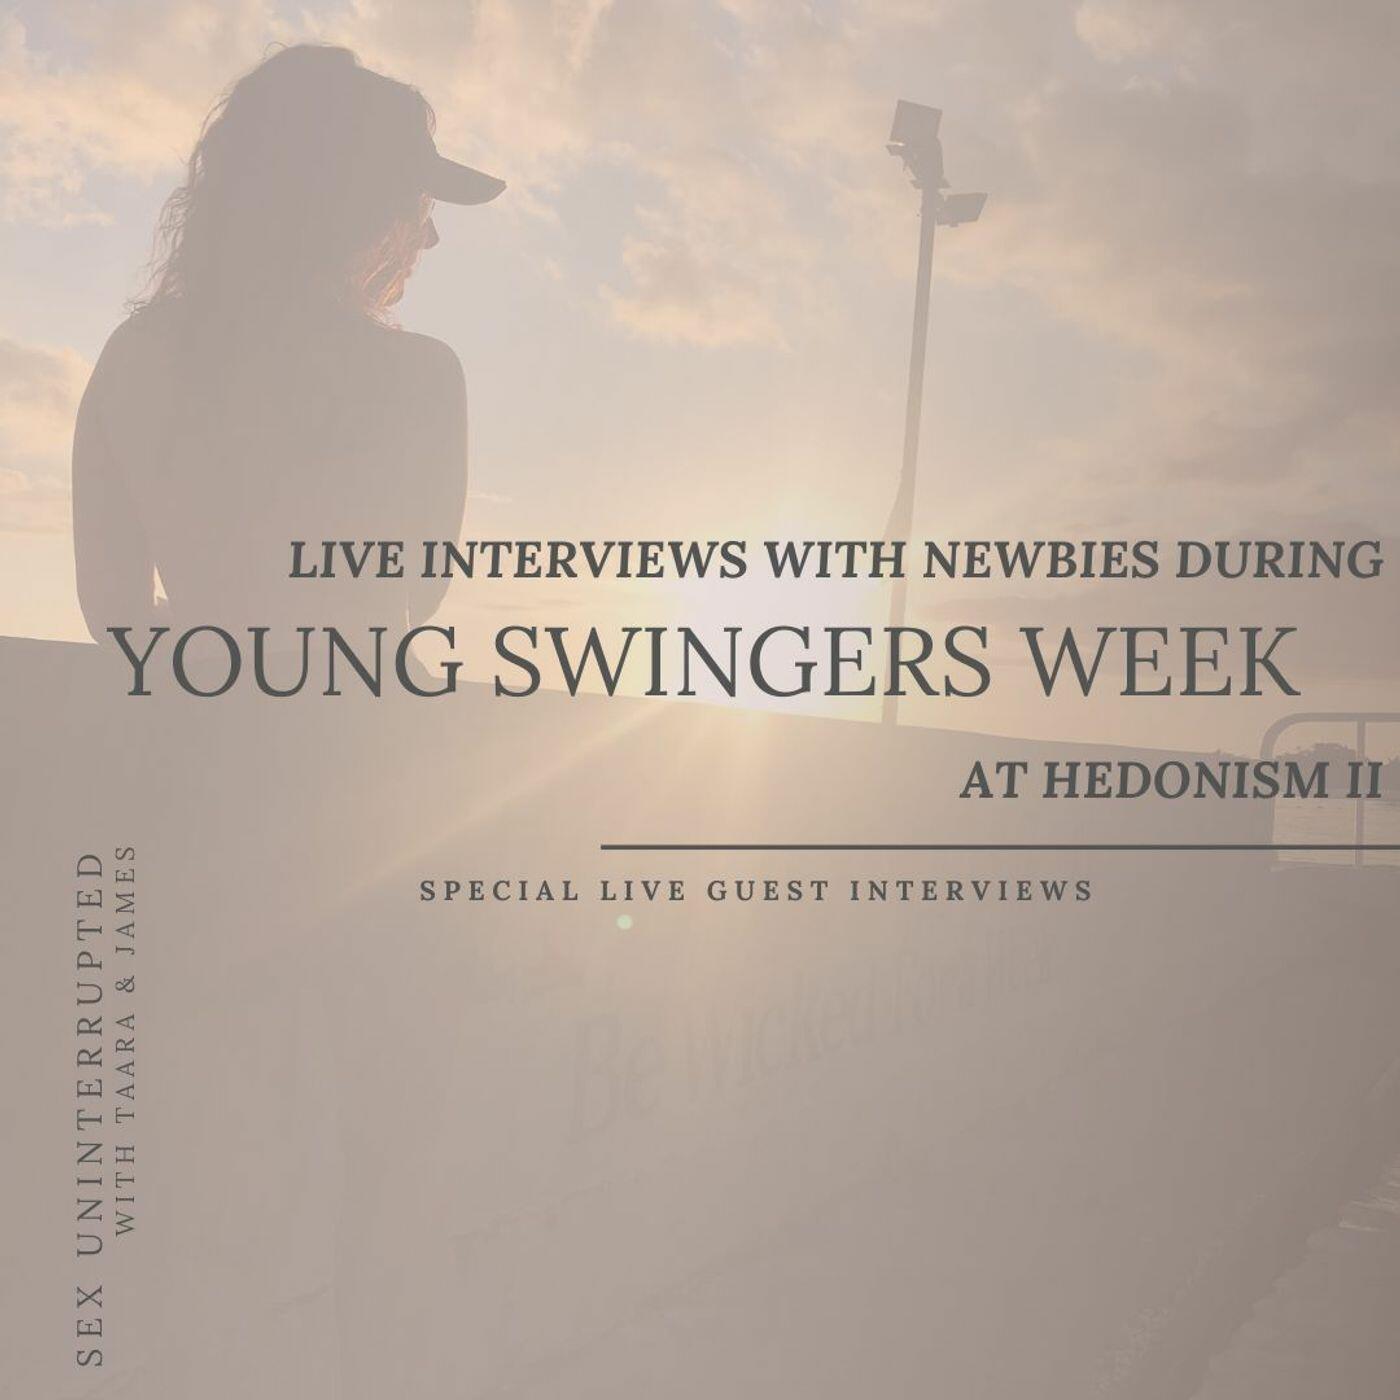 Show 55 Live Interviews with Newbies during Young Swingers Week at Hedonism II